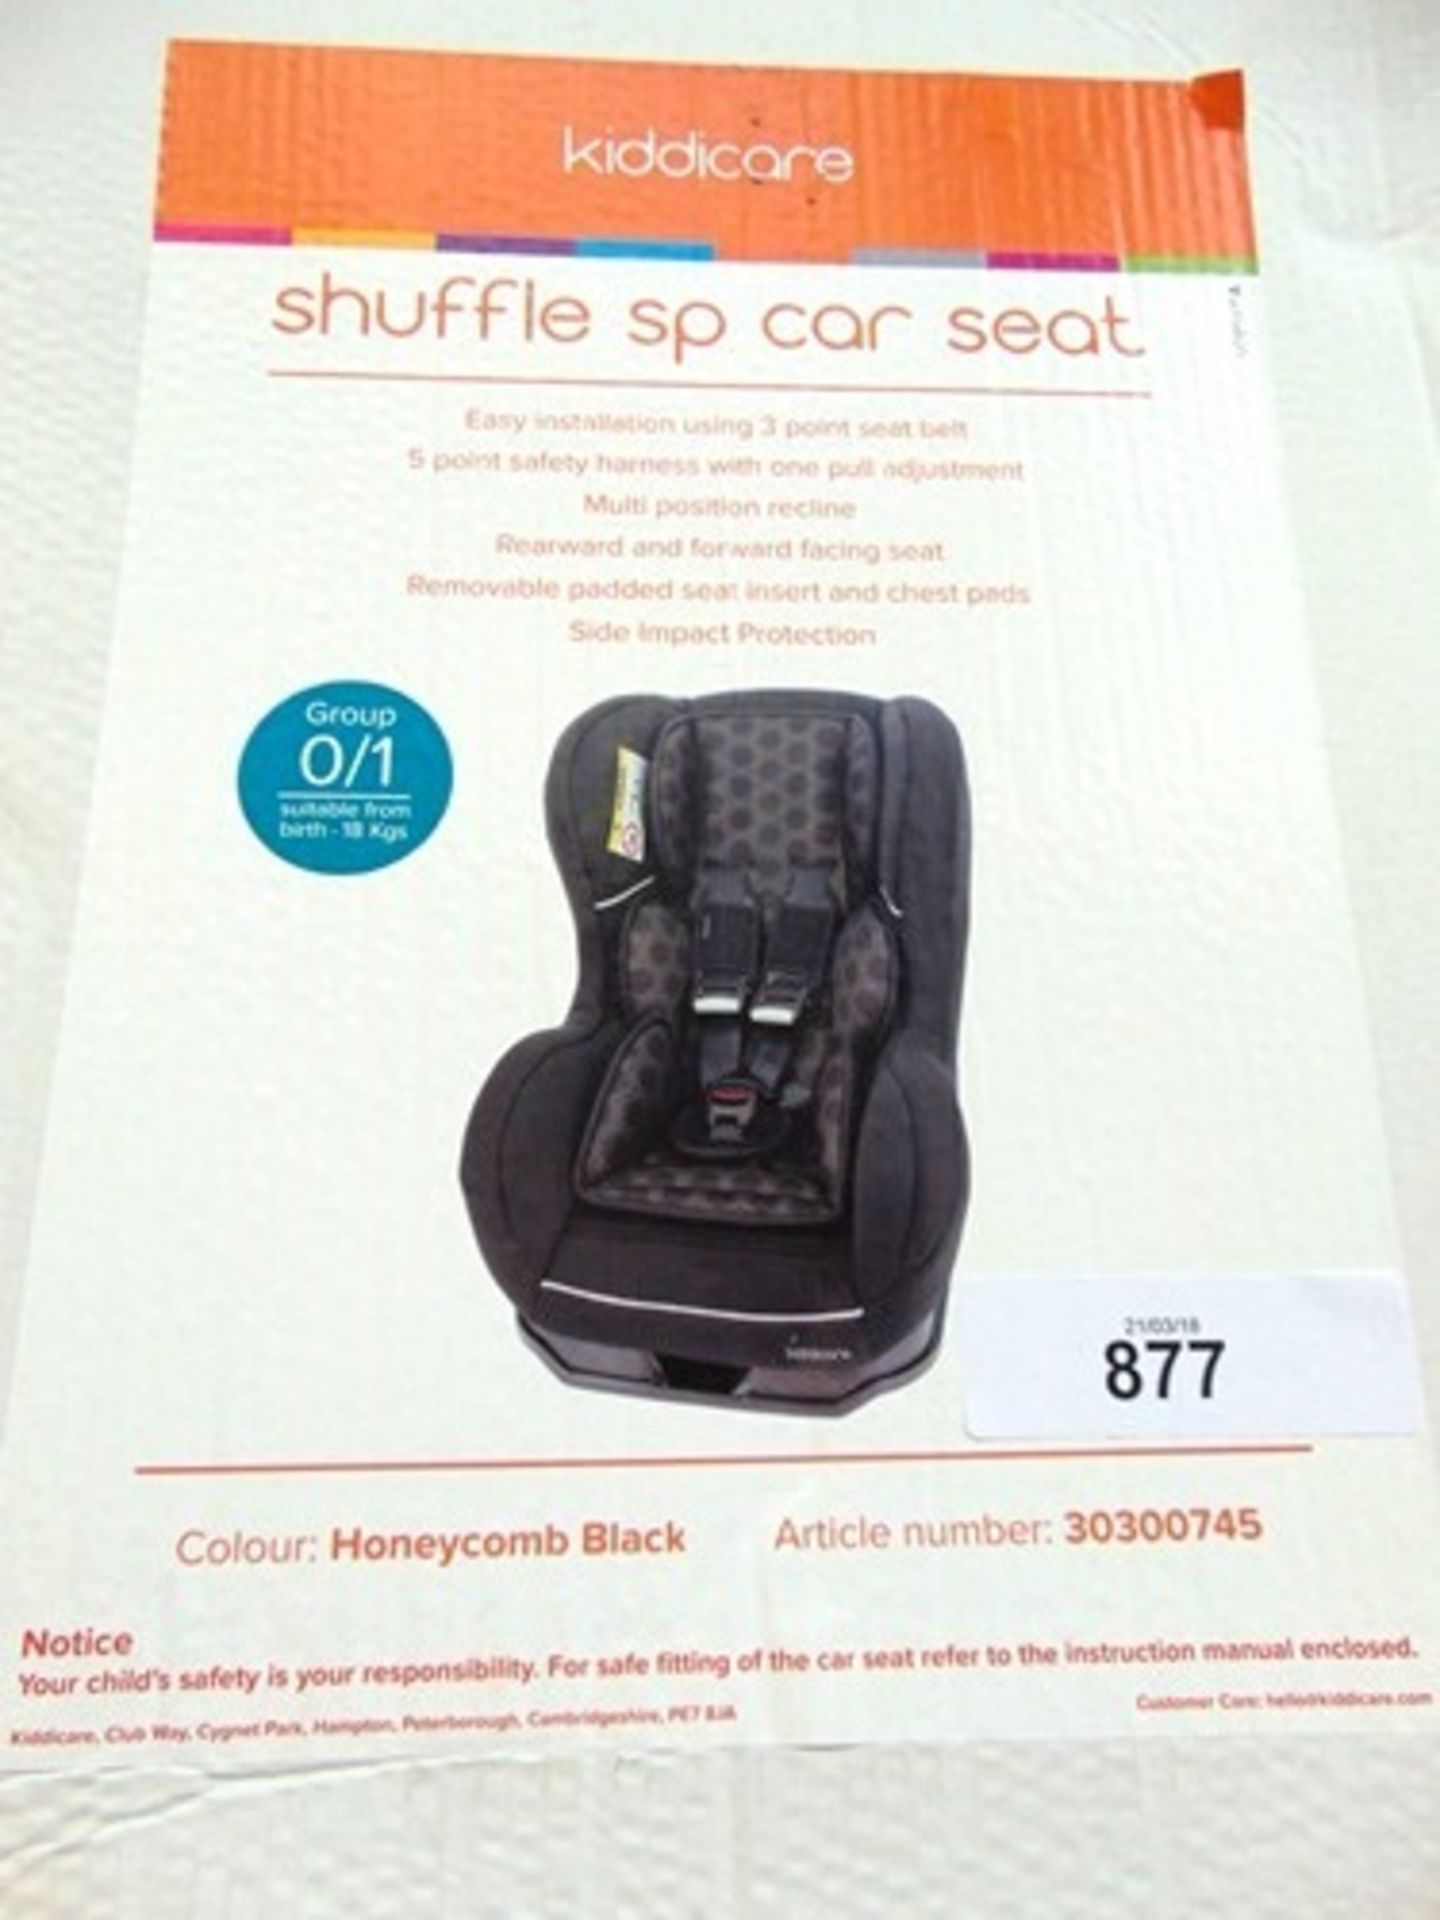 A Kiddicare Shuffle SP car seat, honeycomb black, article number 30300745 - New in box (Bay15)